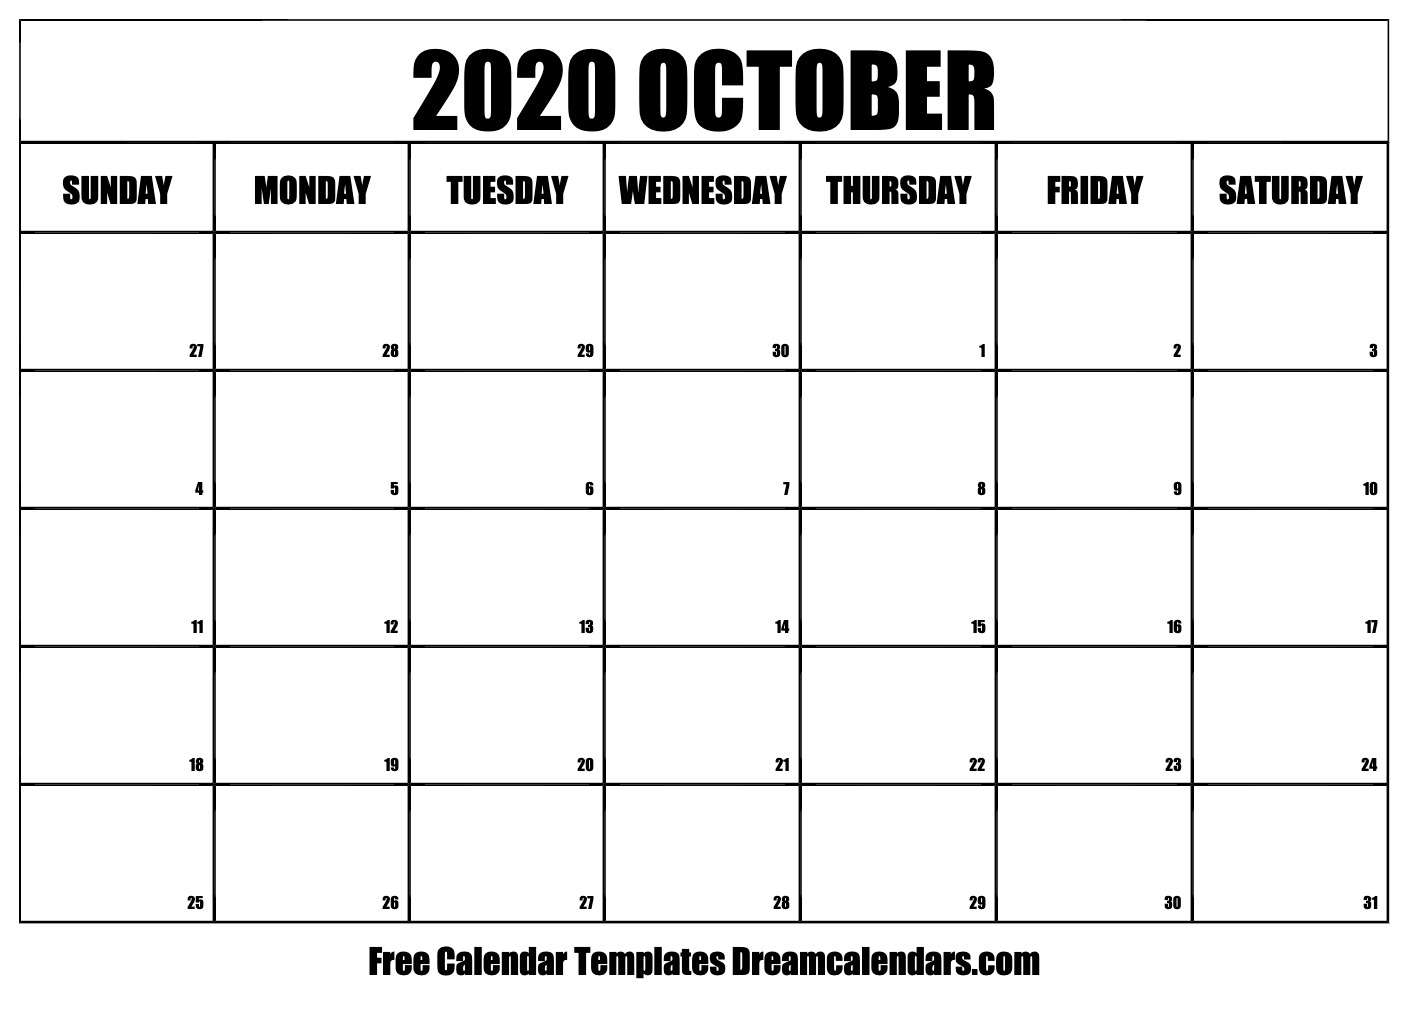 October calendar free blank printable with holidays